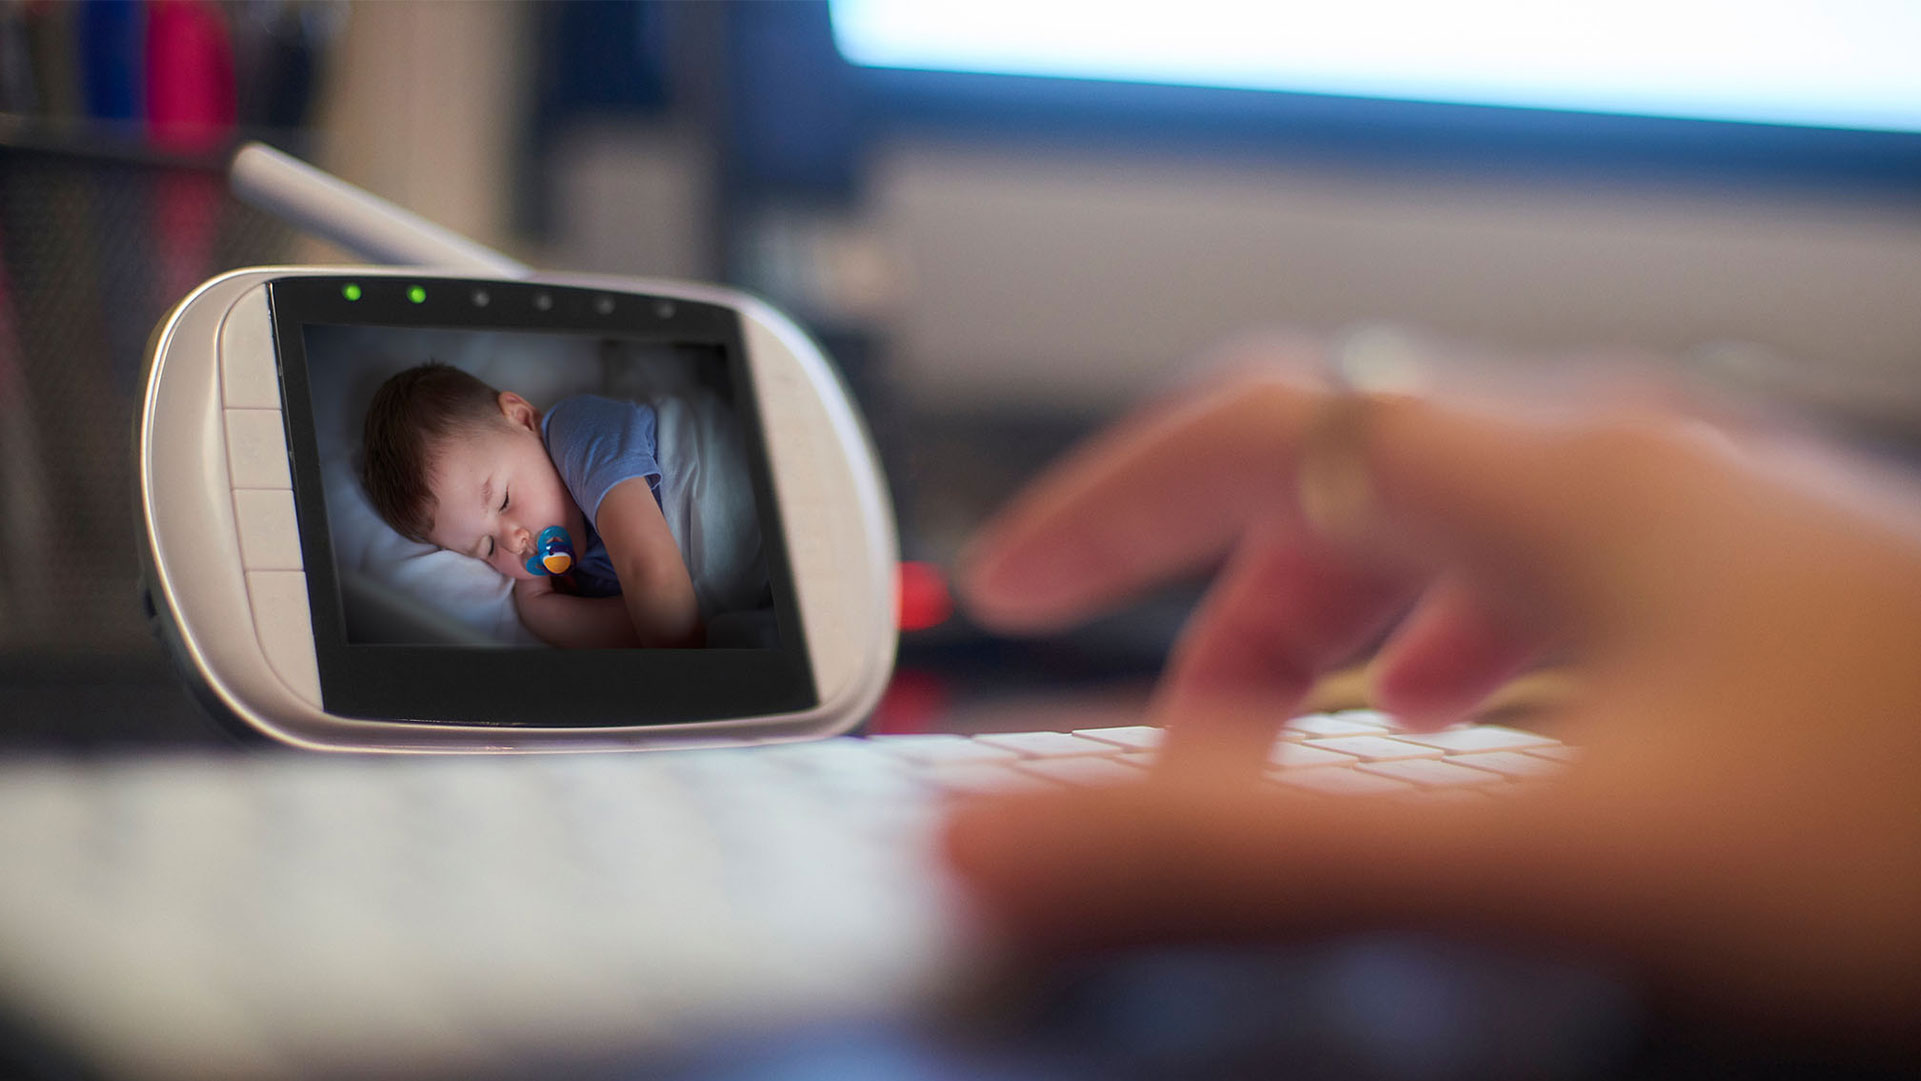 Baby Monitor Security: Ward Off Hackers with These Tips - Panda